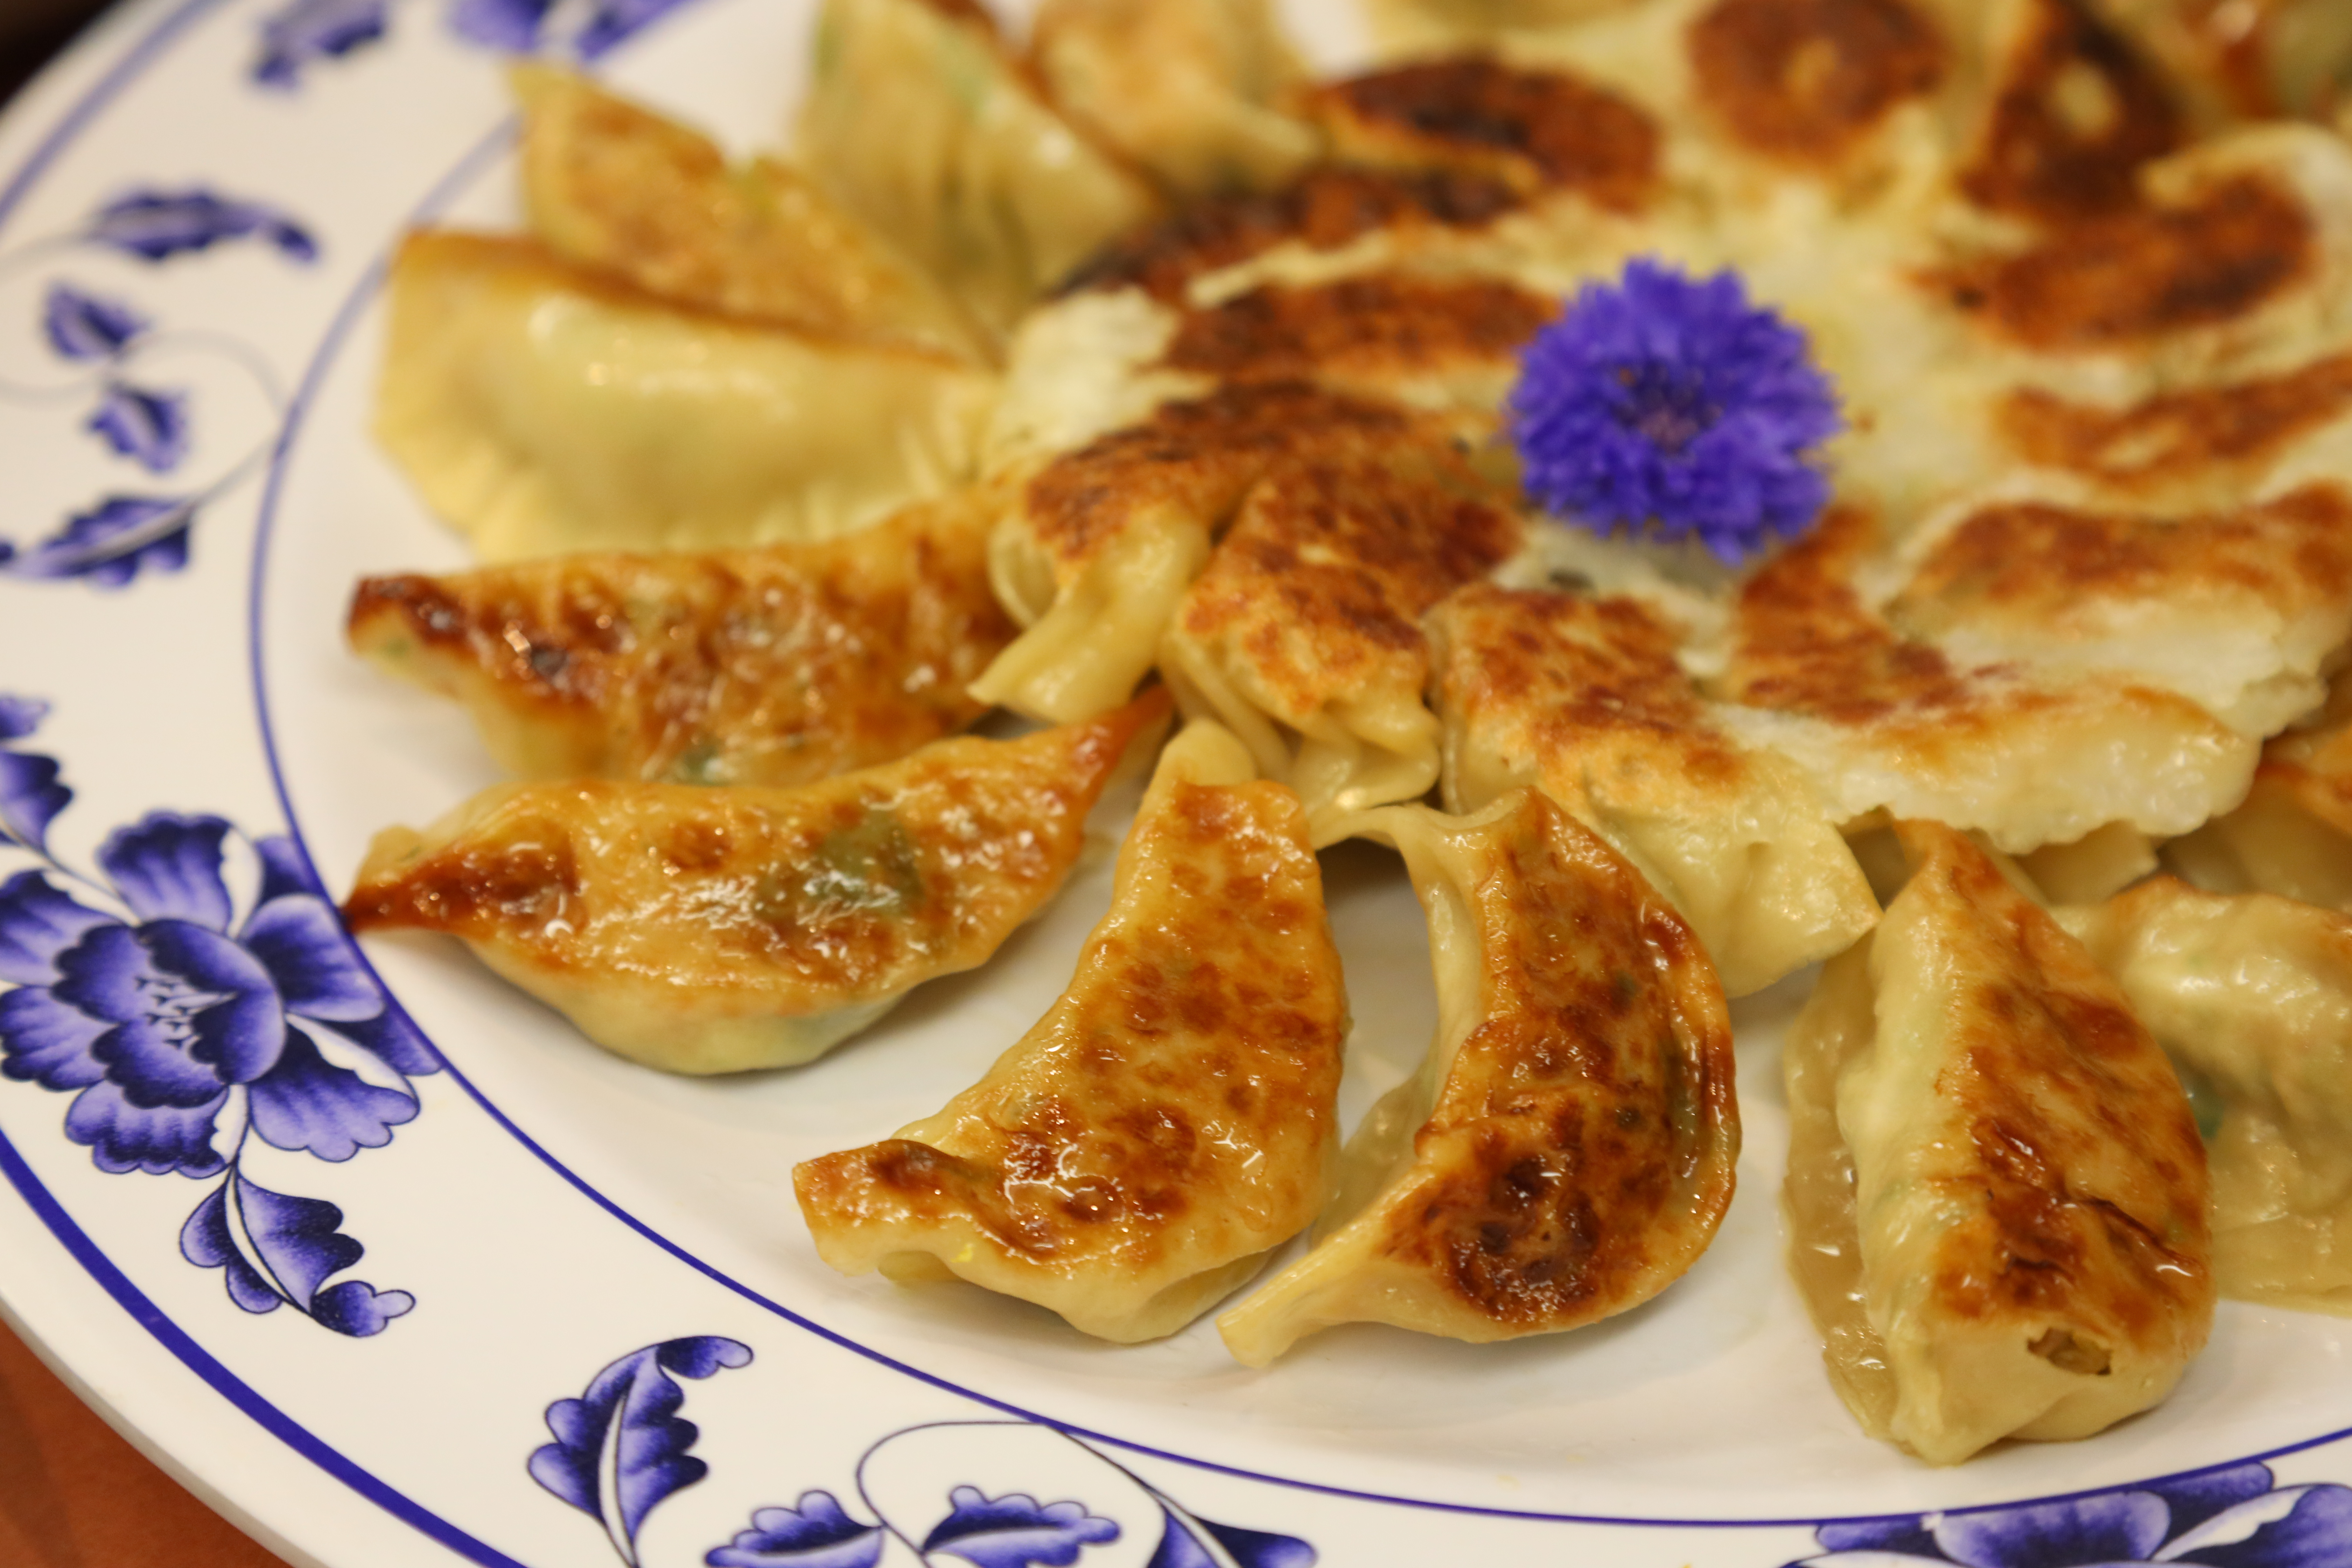 Guo Tie, a type of Chinese dumplings also known as potstickers, sit on a white plate